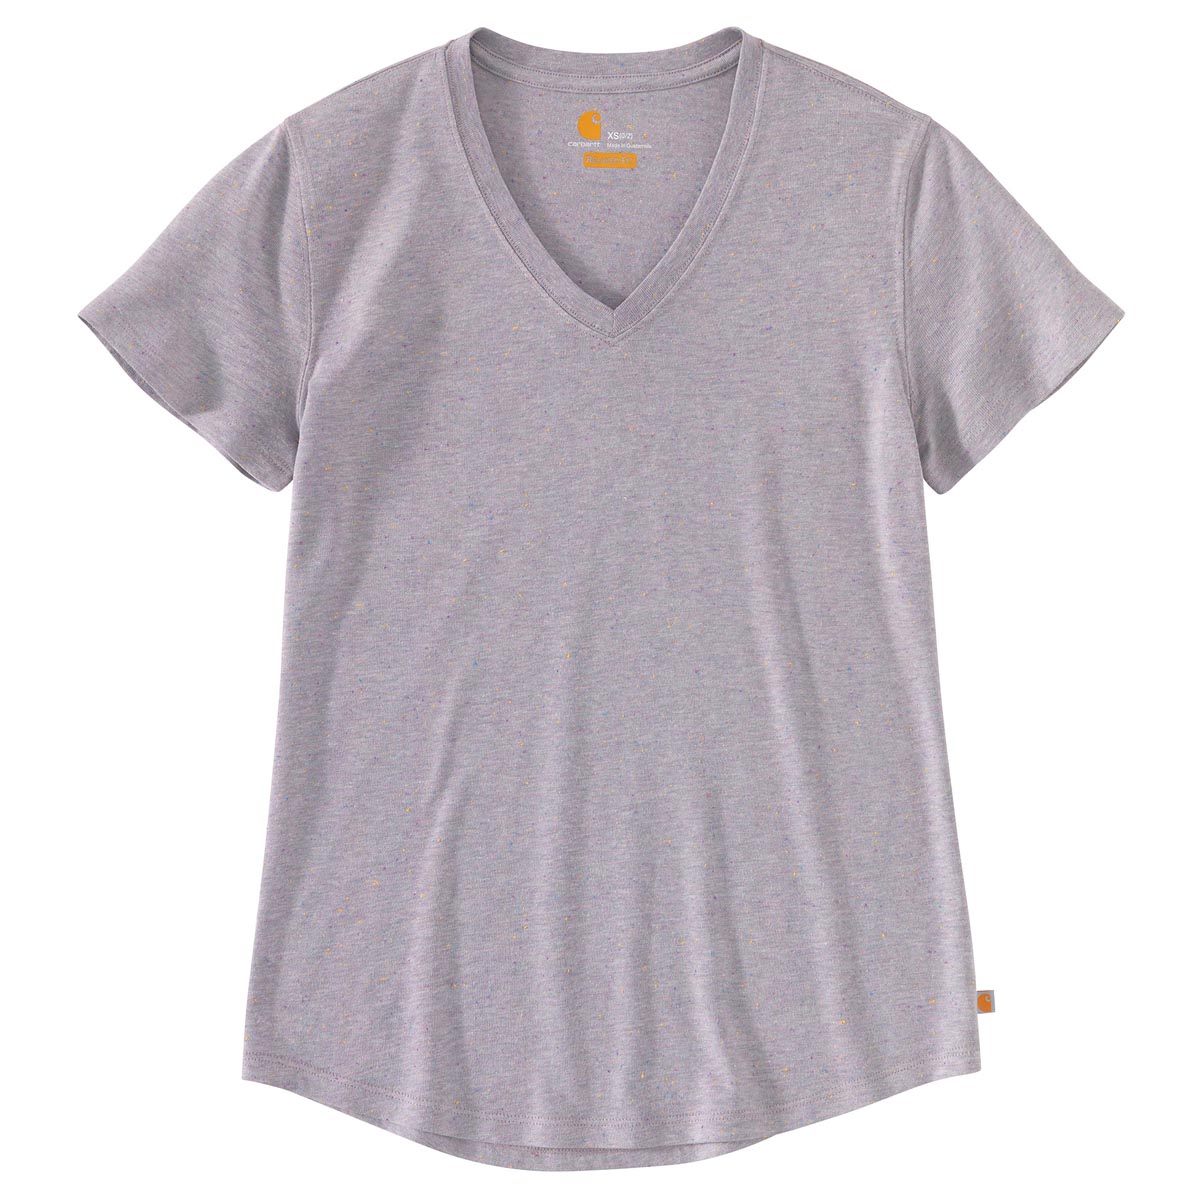 Carhartt Women's Relaxed Fit Midweight SS V-Neck T-Shirt - Discontinued Pricing